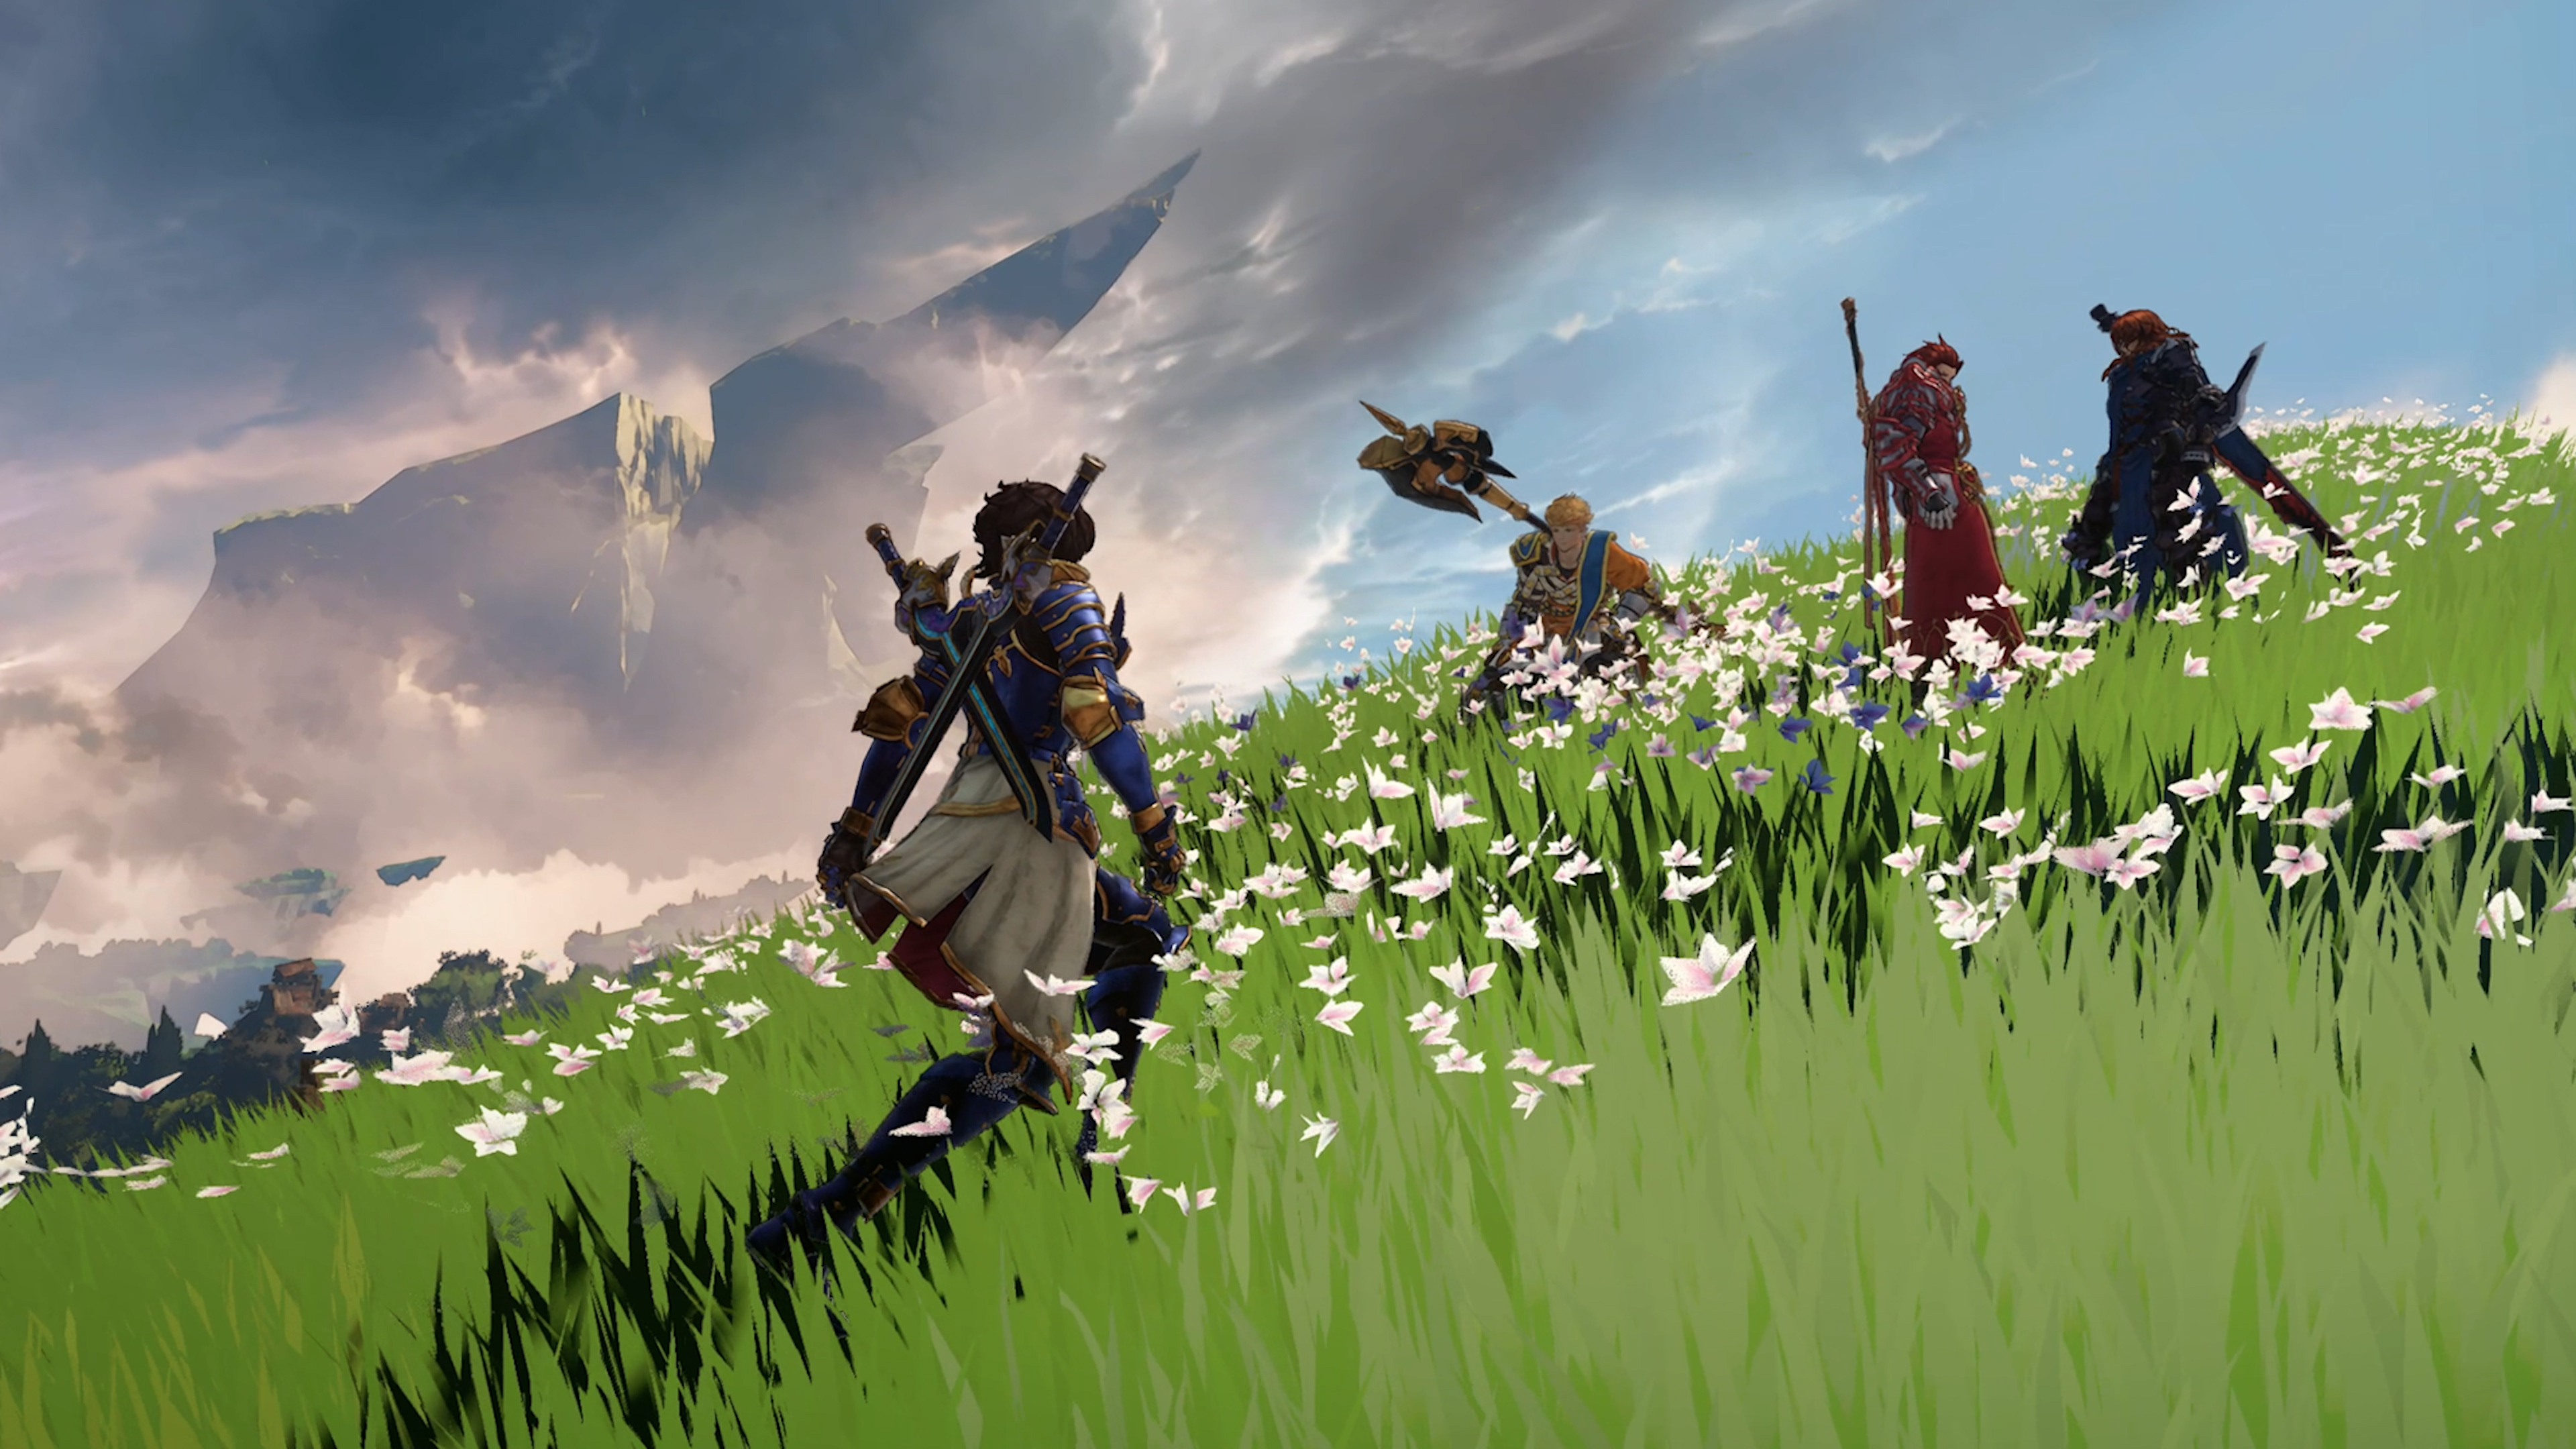 The RPG High Will Endure in Granblue Fantasy: Relink